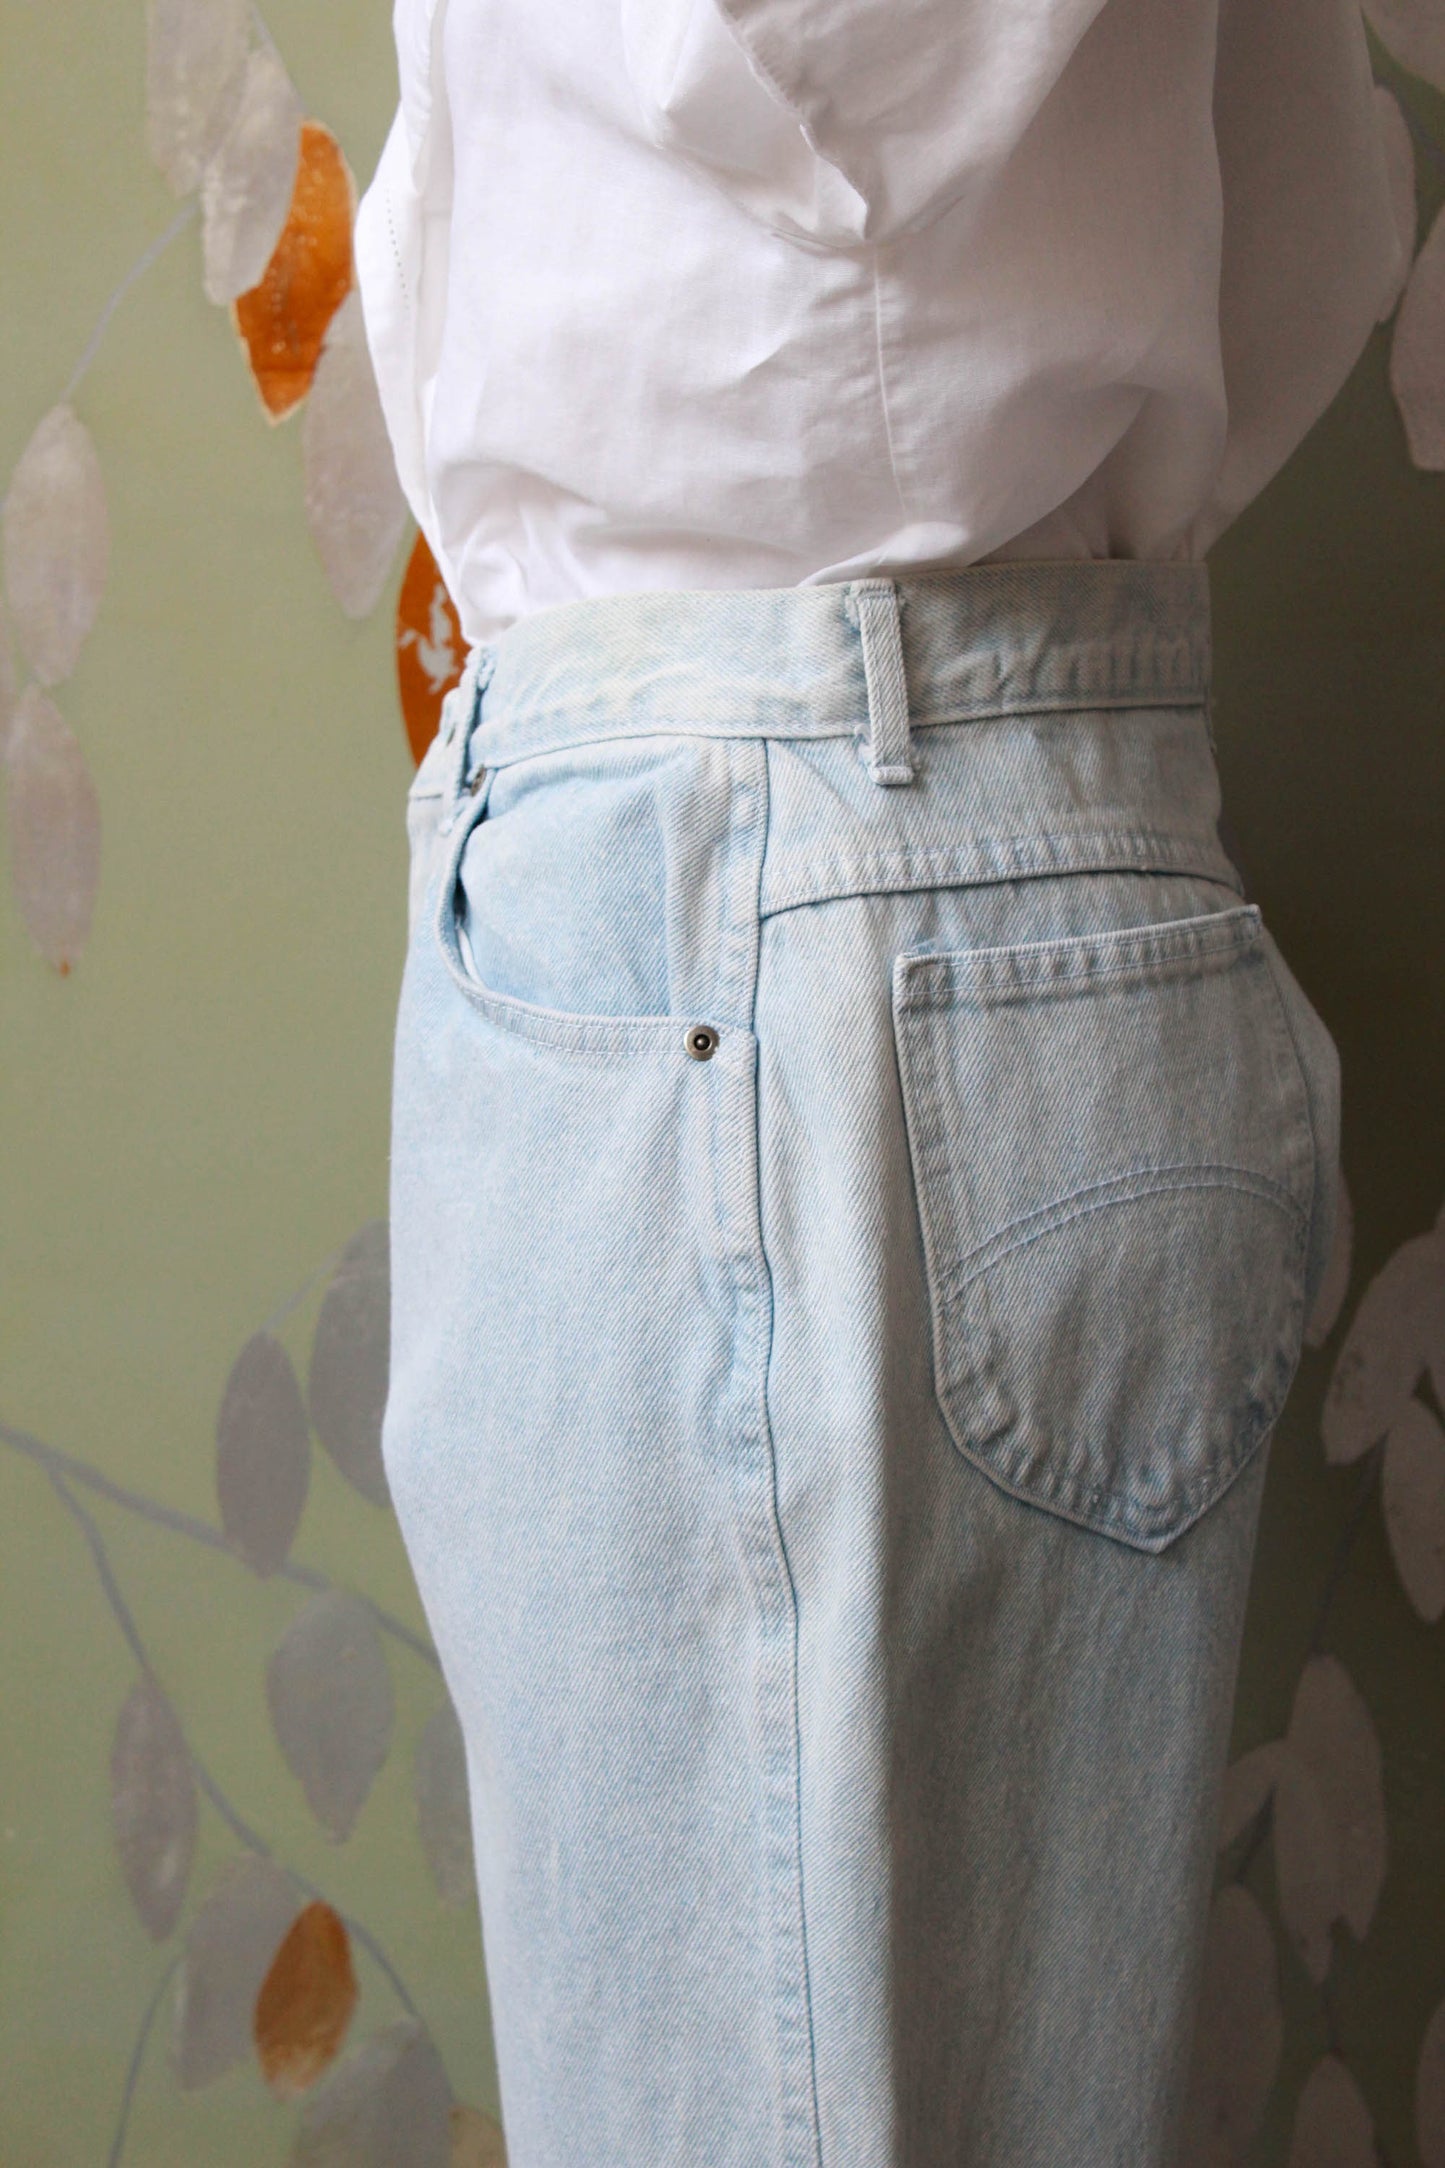 1990s chic denim jeans bleached out light blue wash high waisted 5 pocket design 100% cotton tapered leg high waisted jeans